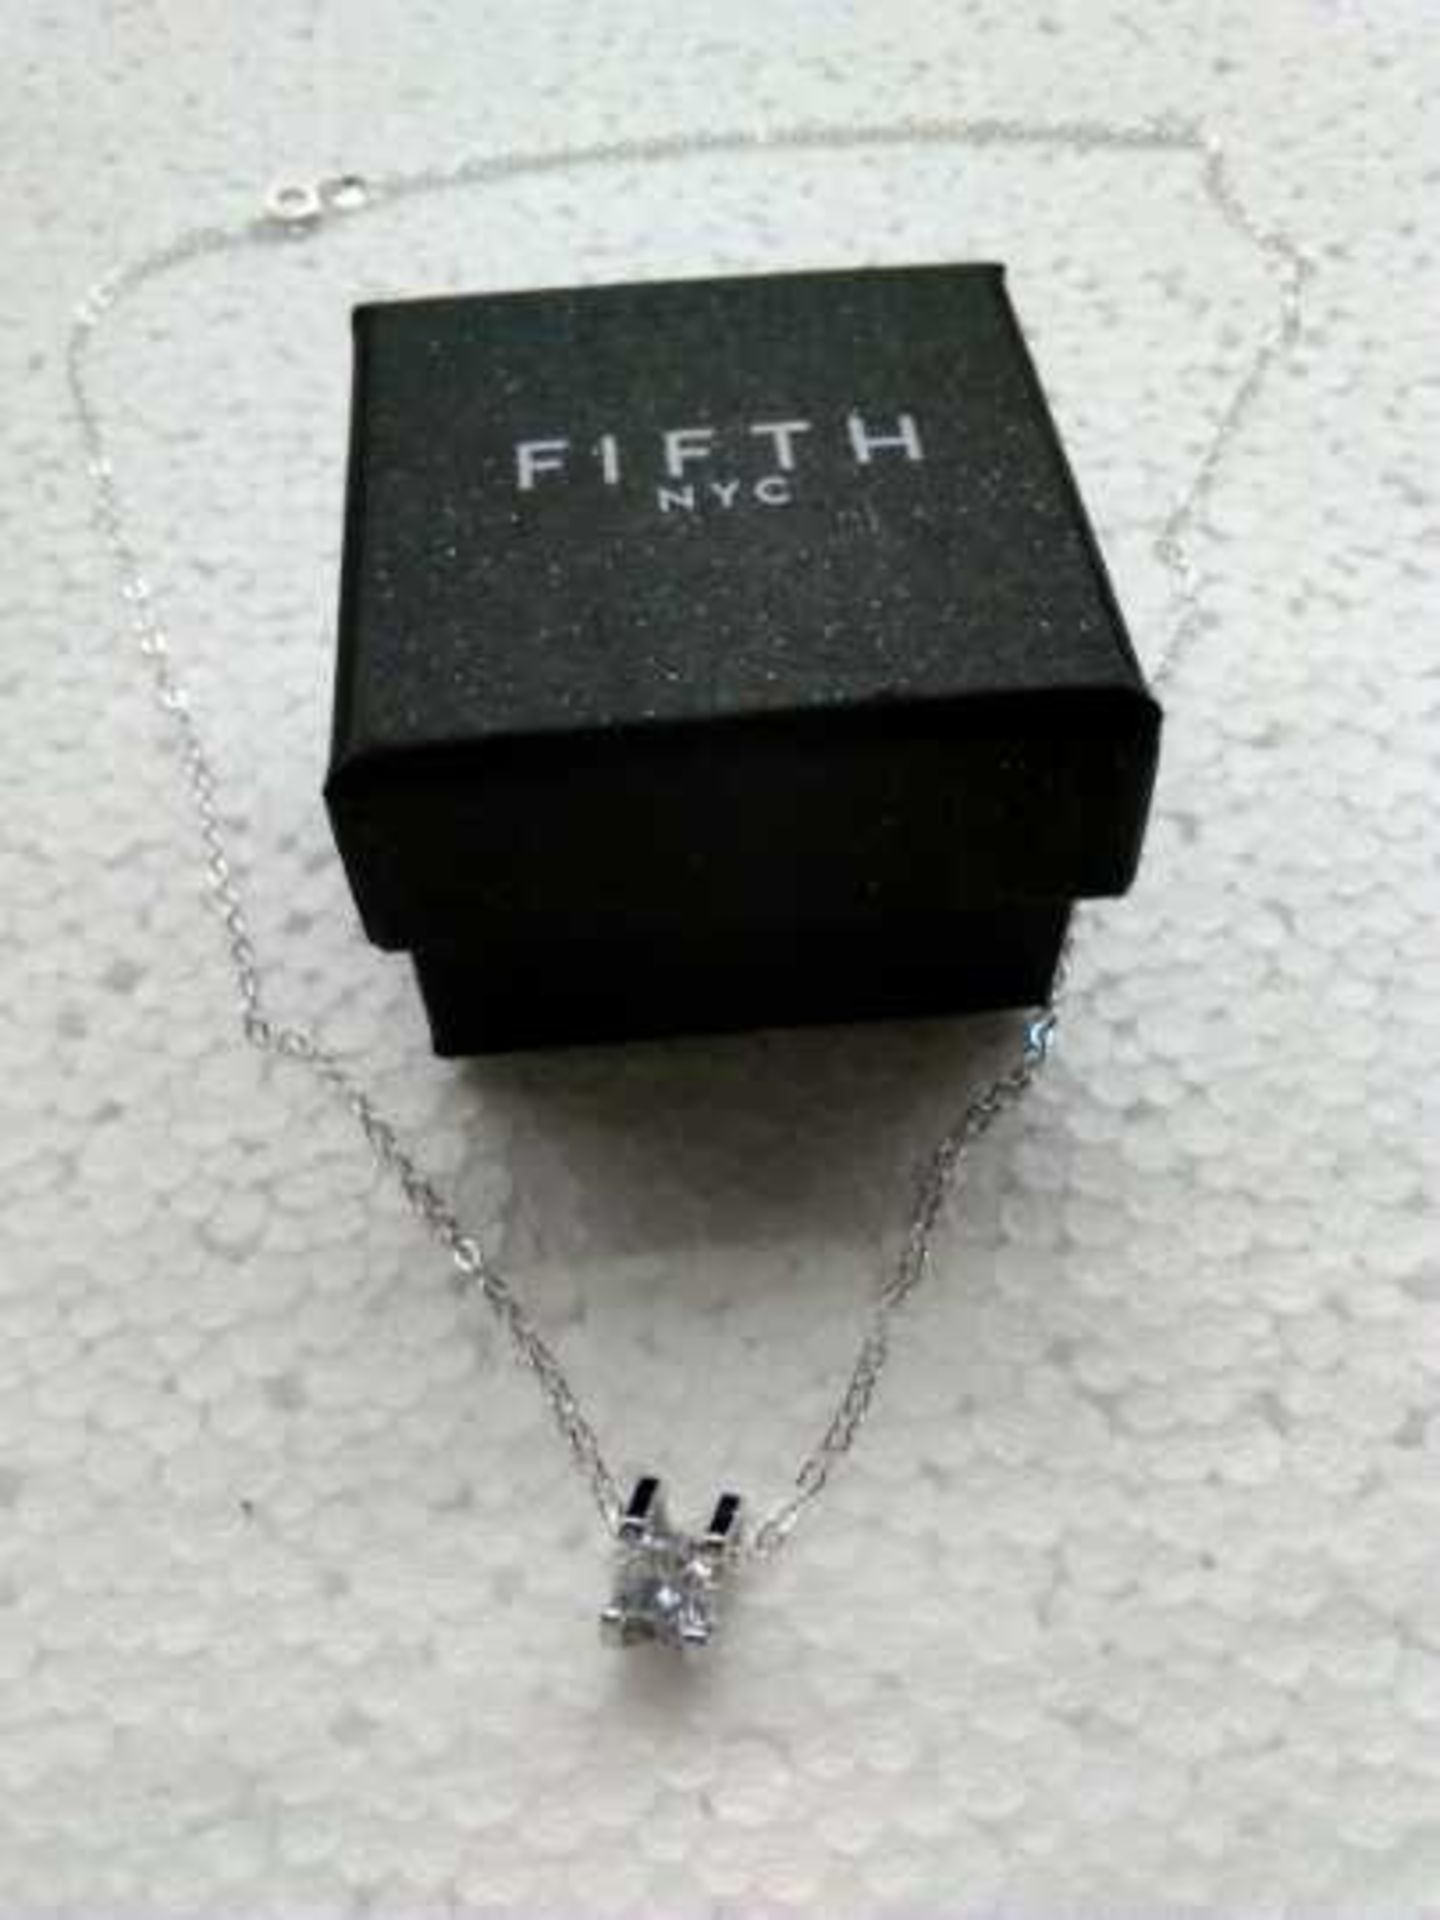 NO VAT!!!! Brand New Fifth NYC Jewellery with Swarovski Element Crystals in presentation box